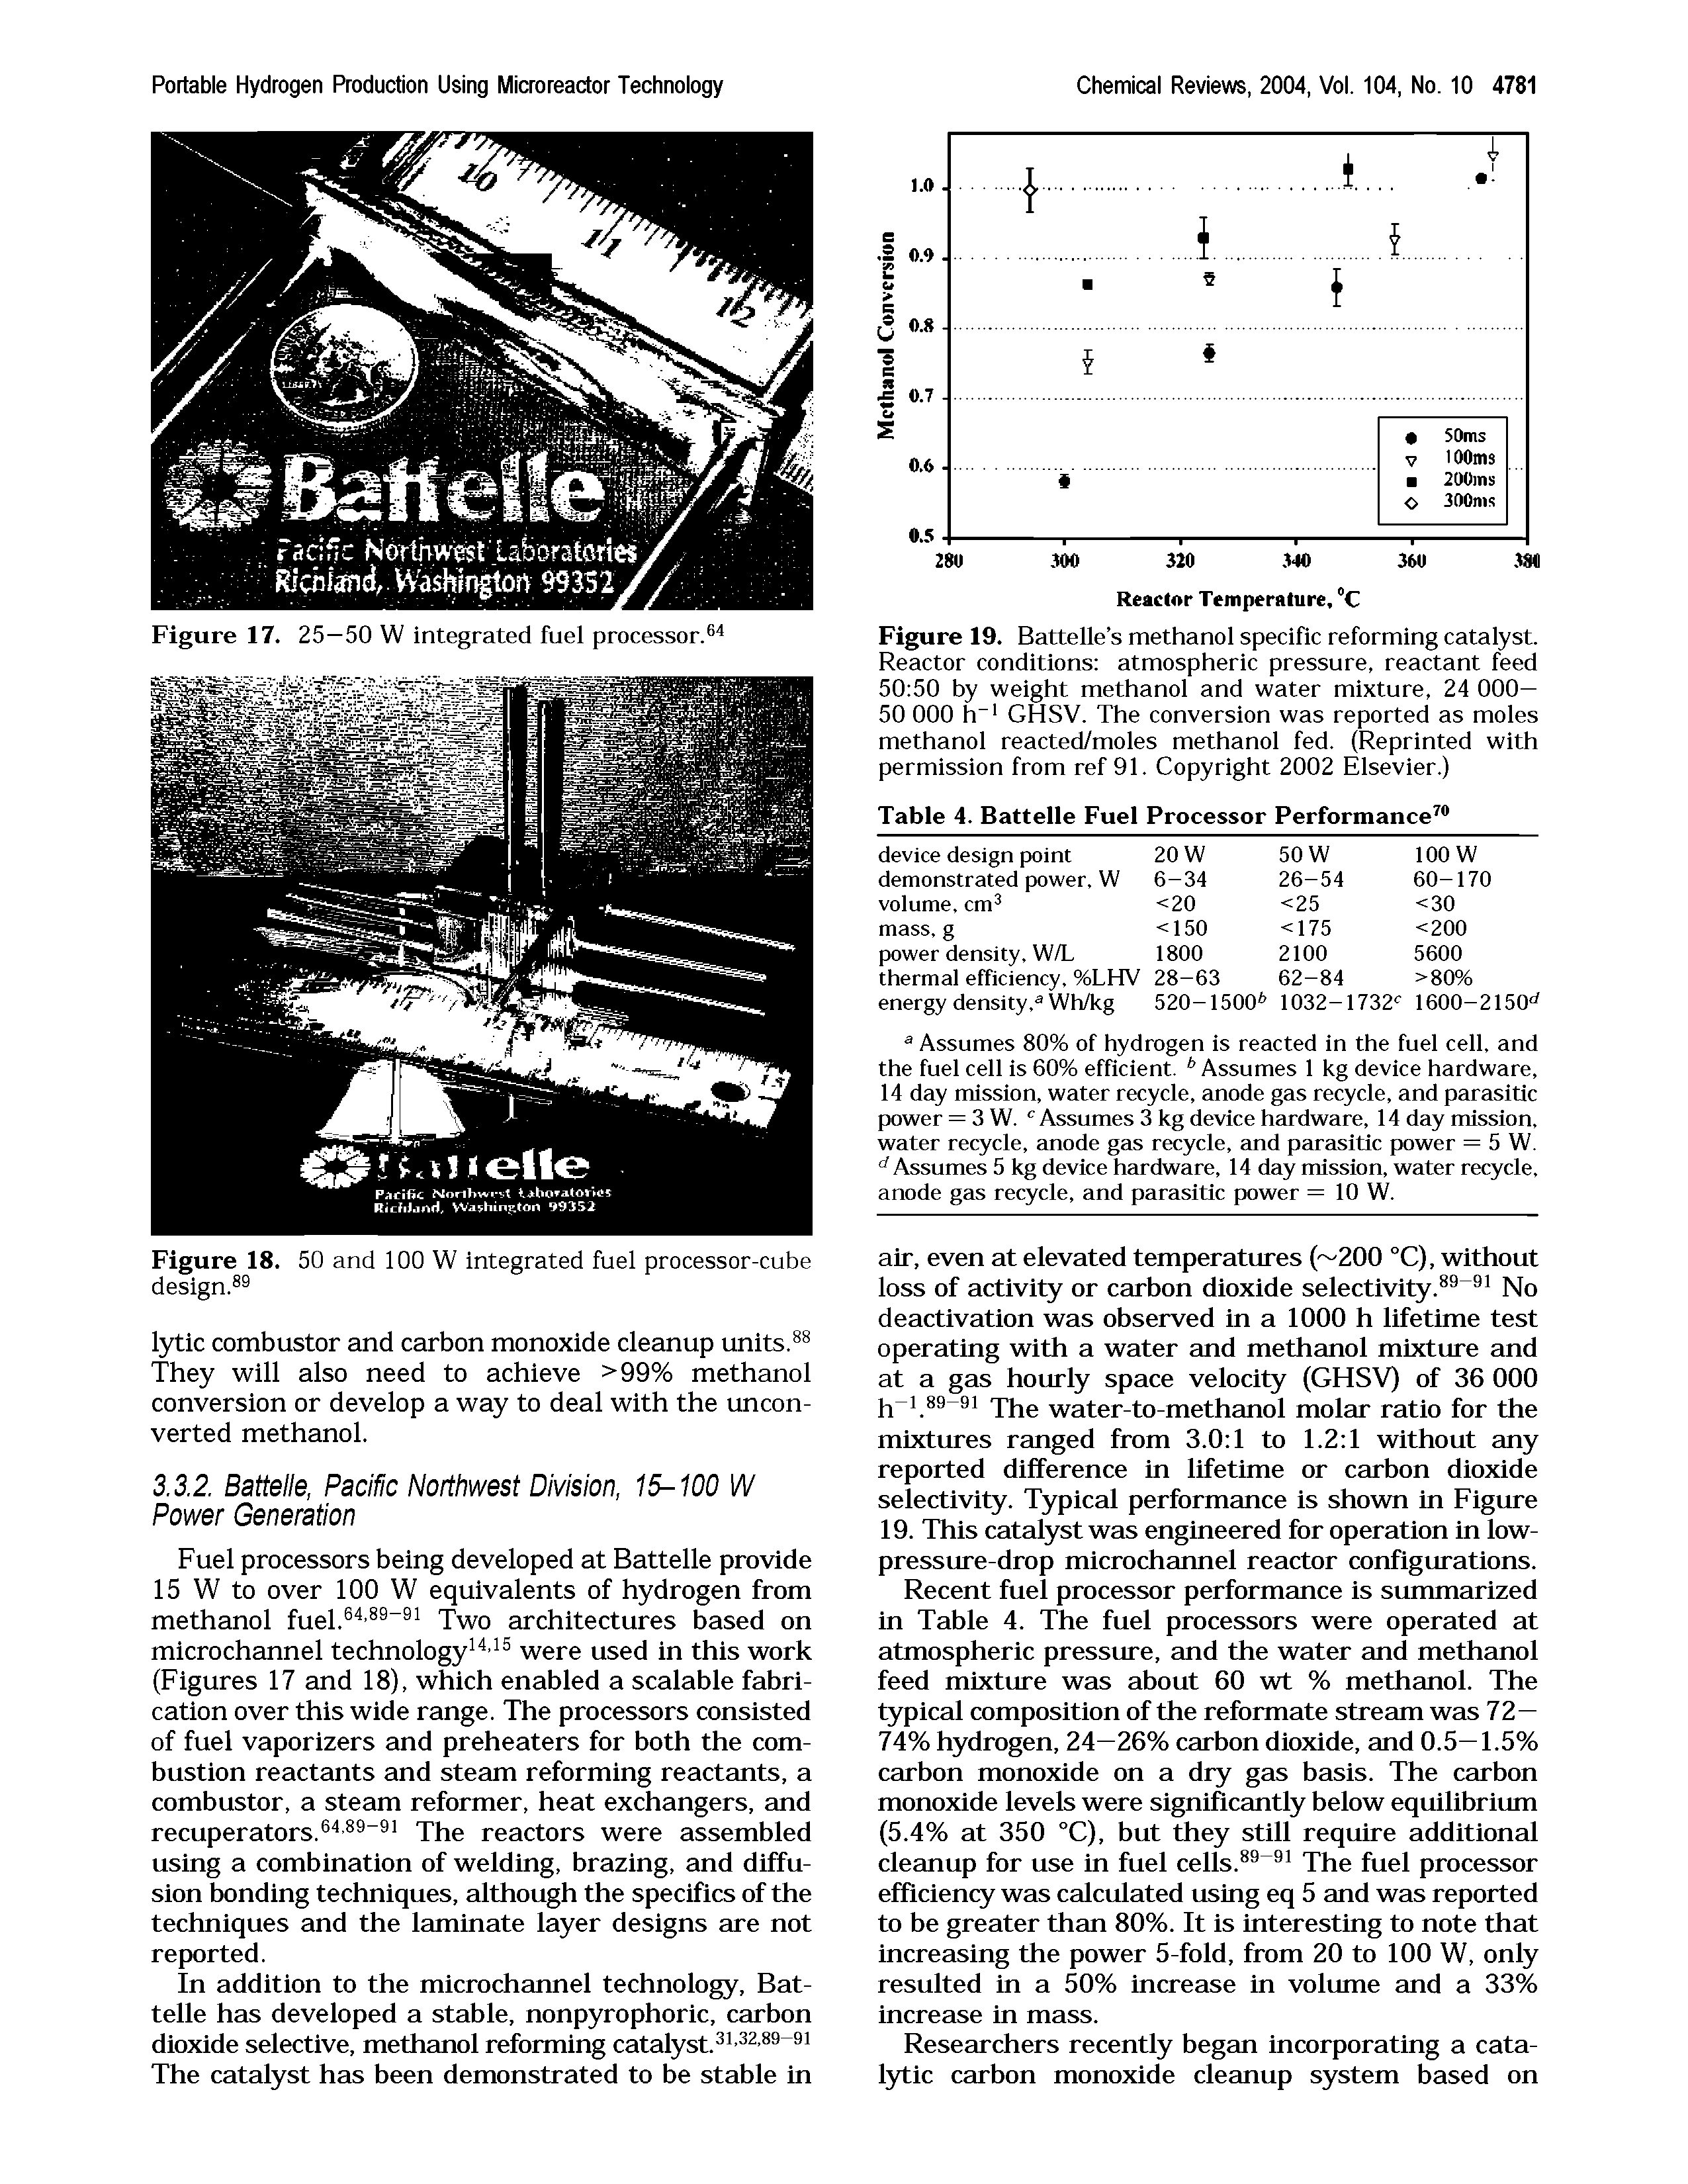 Figure 19. Battelle s methanol specific reforming catalyst. Reactor conditions atmospheric pressure, reactant feed 50 50 by weight methanol and water mixture, 24 000— 50 000 ii GHSV. The conversion was reported as moles methanol reacted/moles methanol fed. (Reprinted with permission from ref 91. Copyright 2002 Elsevier.)...